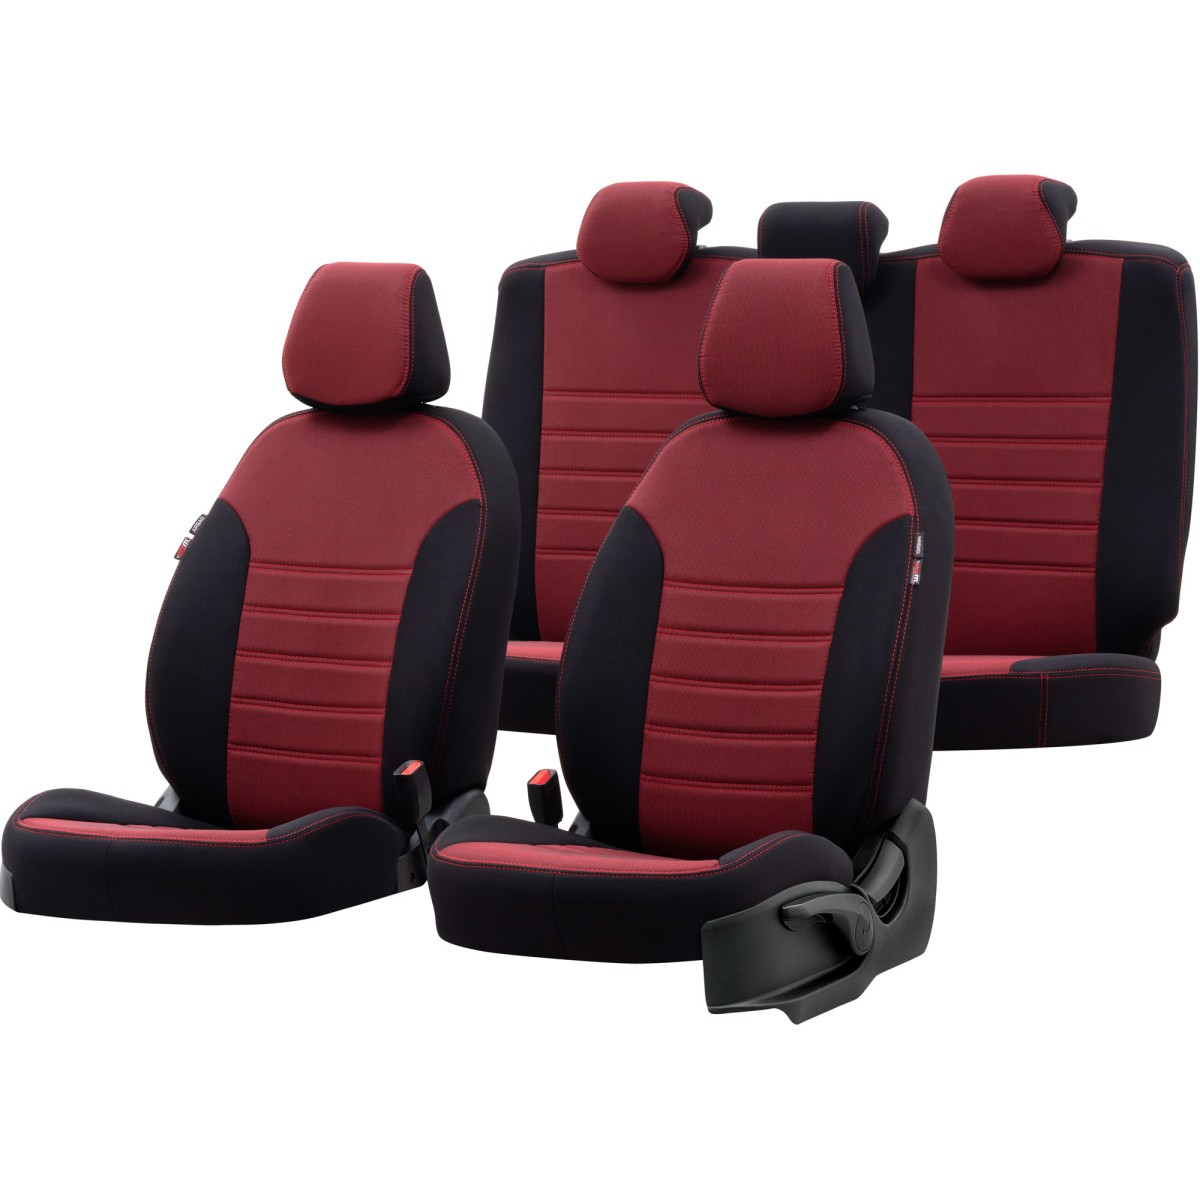 Original seat covers (textile) Opel Astra H